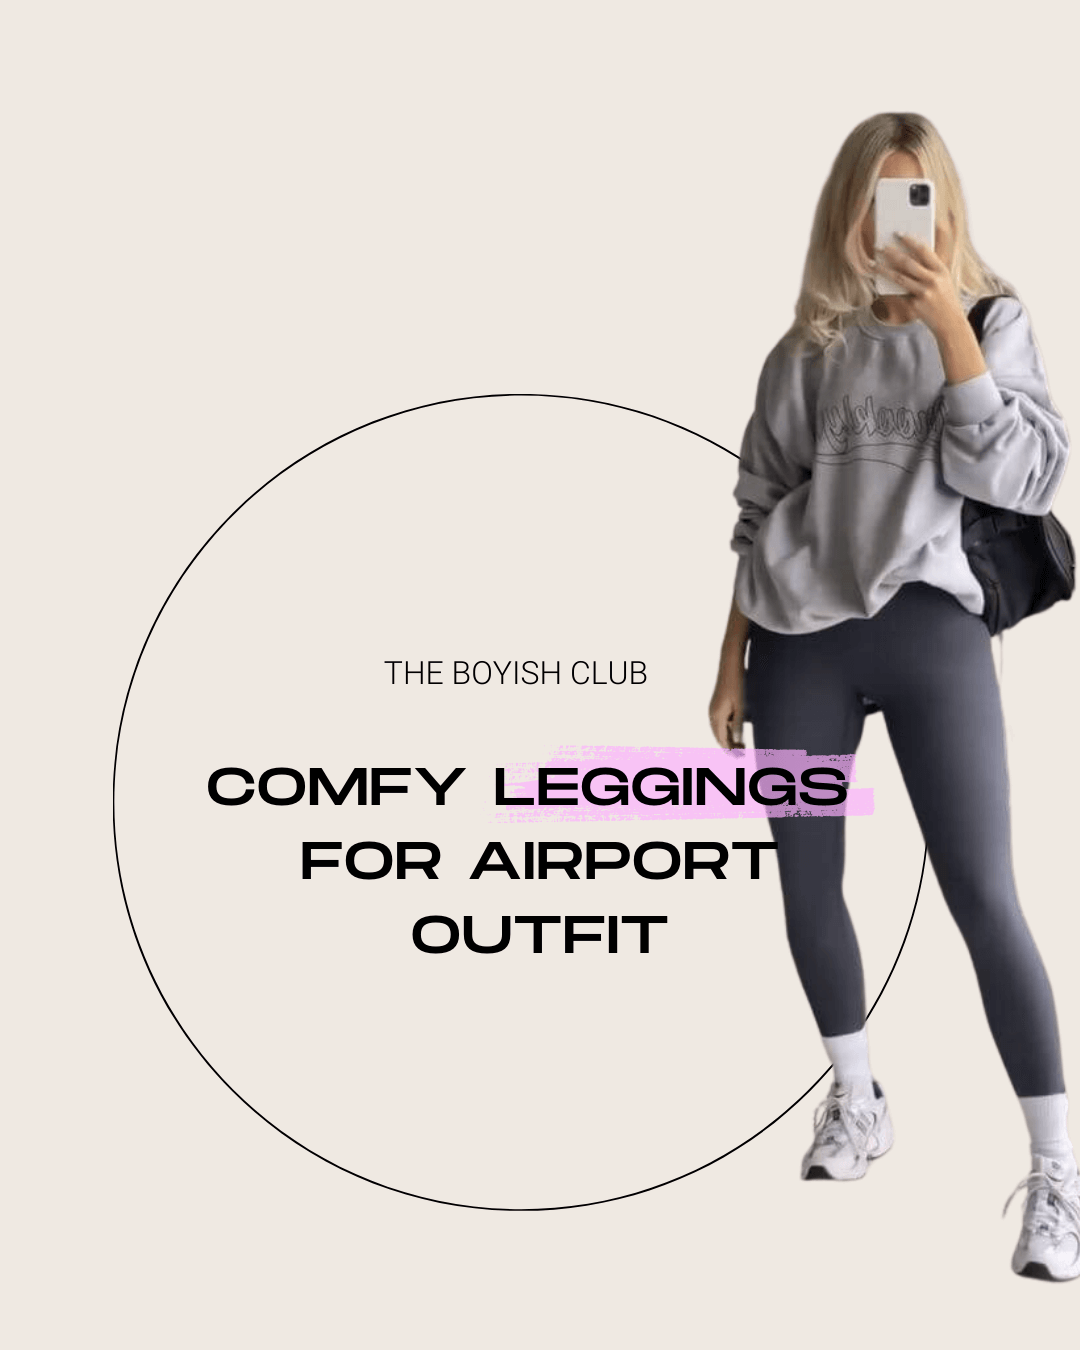 Comfy leggings for airport outfit